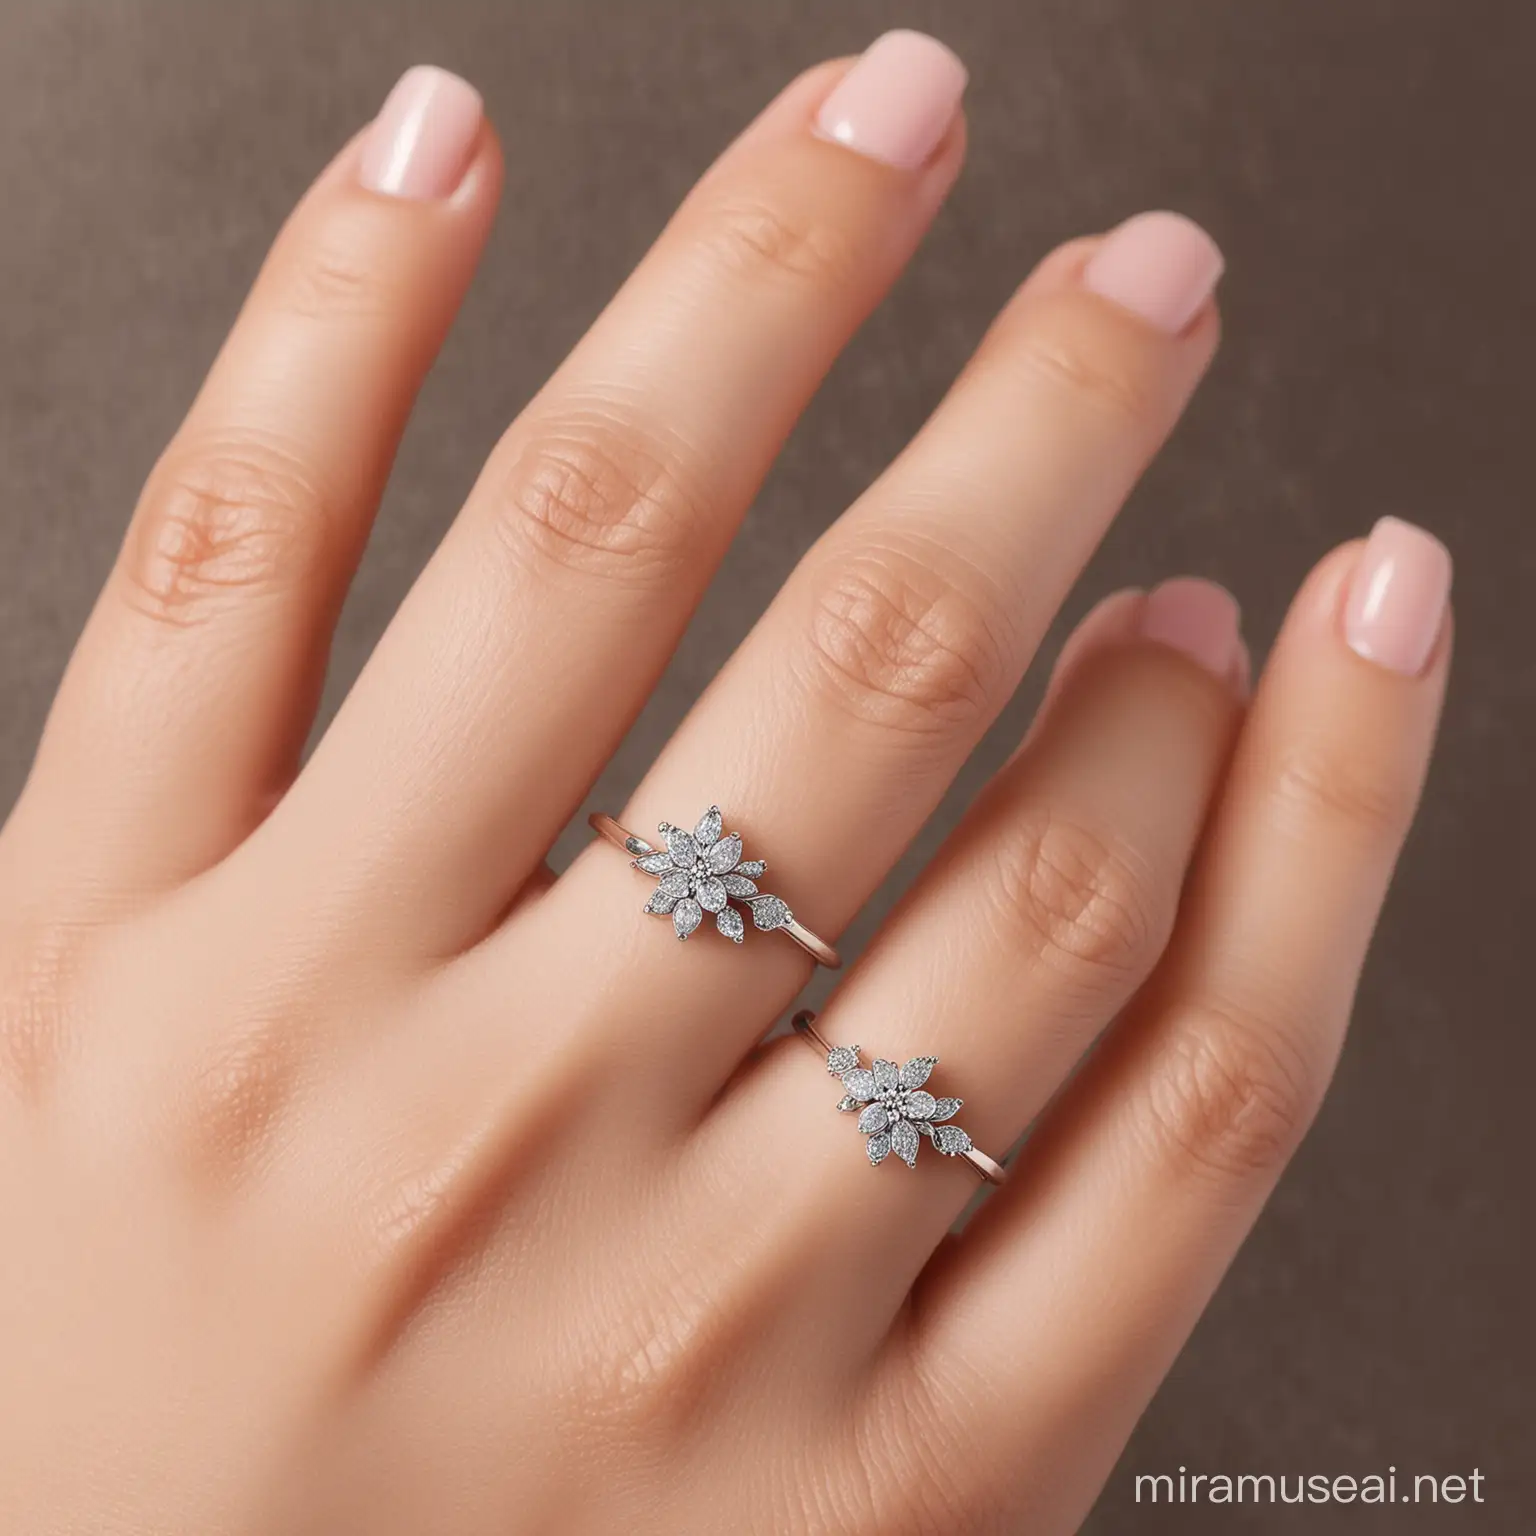 Complete the set with a delicate silver ring featuring a minimalist floral design, incorporating small affordable stones in a symmetrical arrangement to evoke the beauty of a blossoming flower, while remaining within budget constraints.